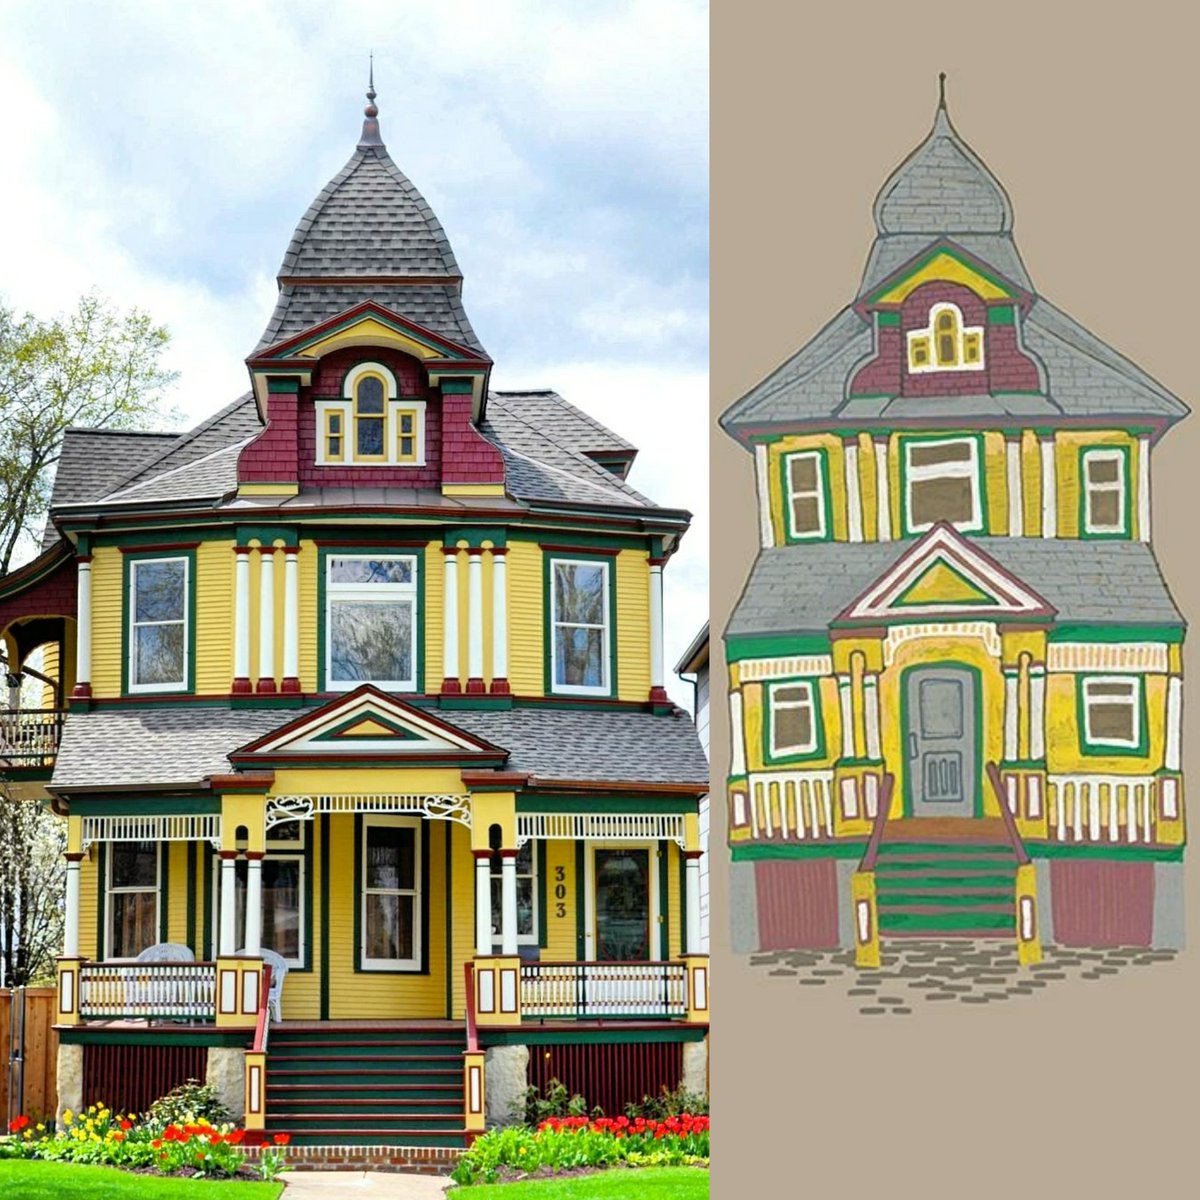 Remembering how an artist was inspired by one of my old house photos from my old house Instagram. This home located at 303 S. Humphrey Avenue in the Ridgeland-Oak Park Historic District was built in 1880.